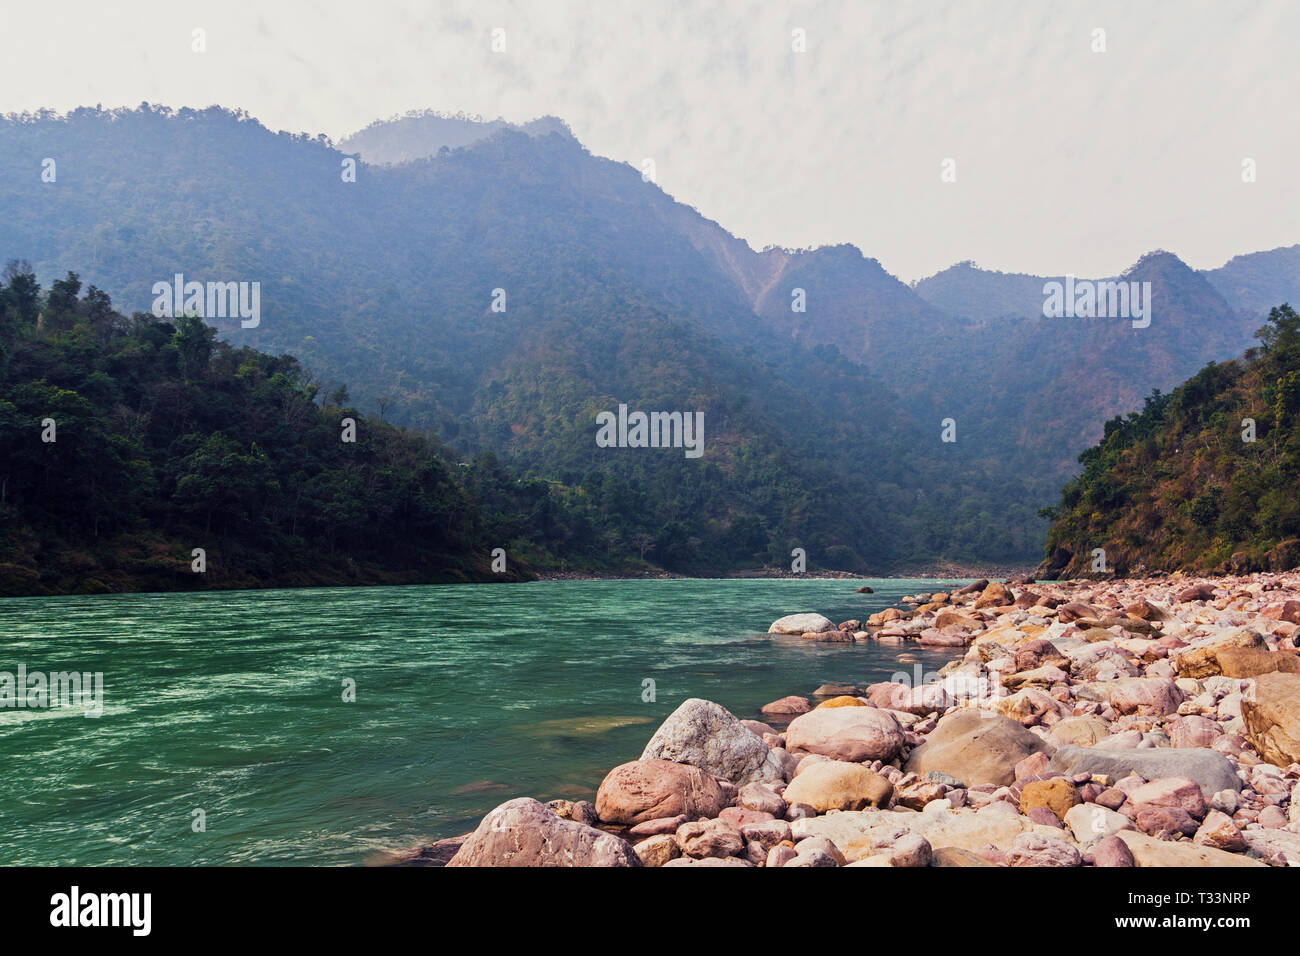 Landscape near the city of Rishikesh India with the sacred river Ganges and mountains. Beautiful mountain landscape with a mountain river in the Himal Stock Photo